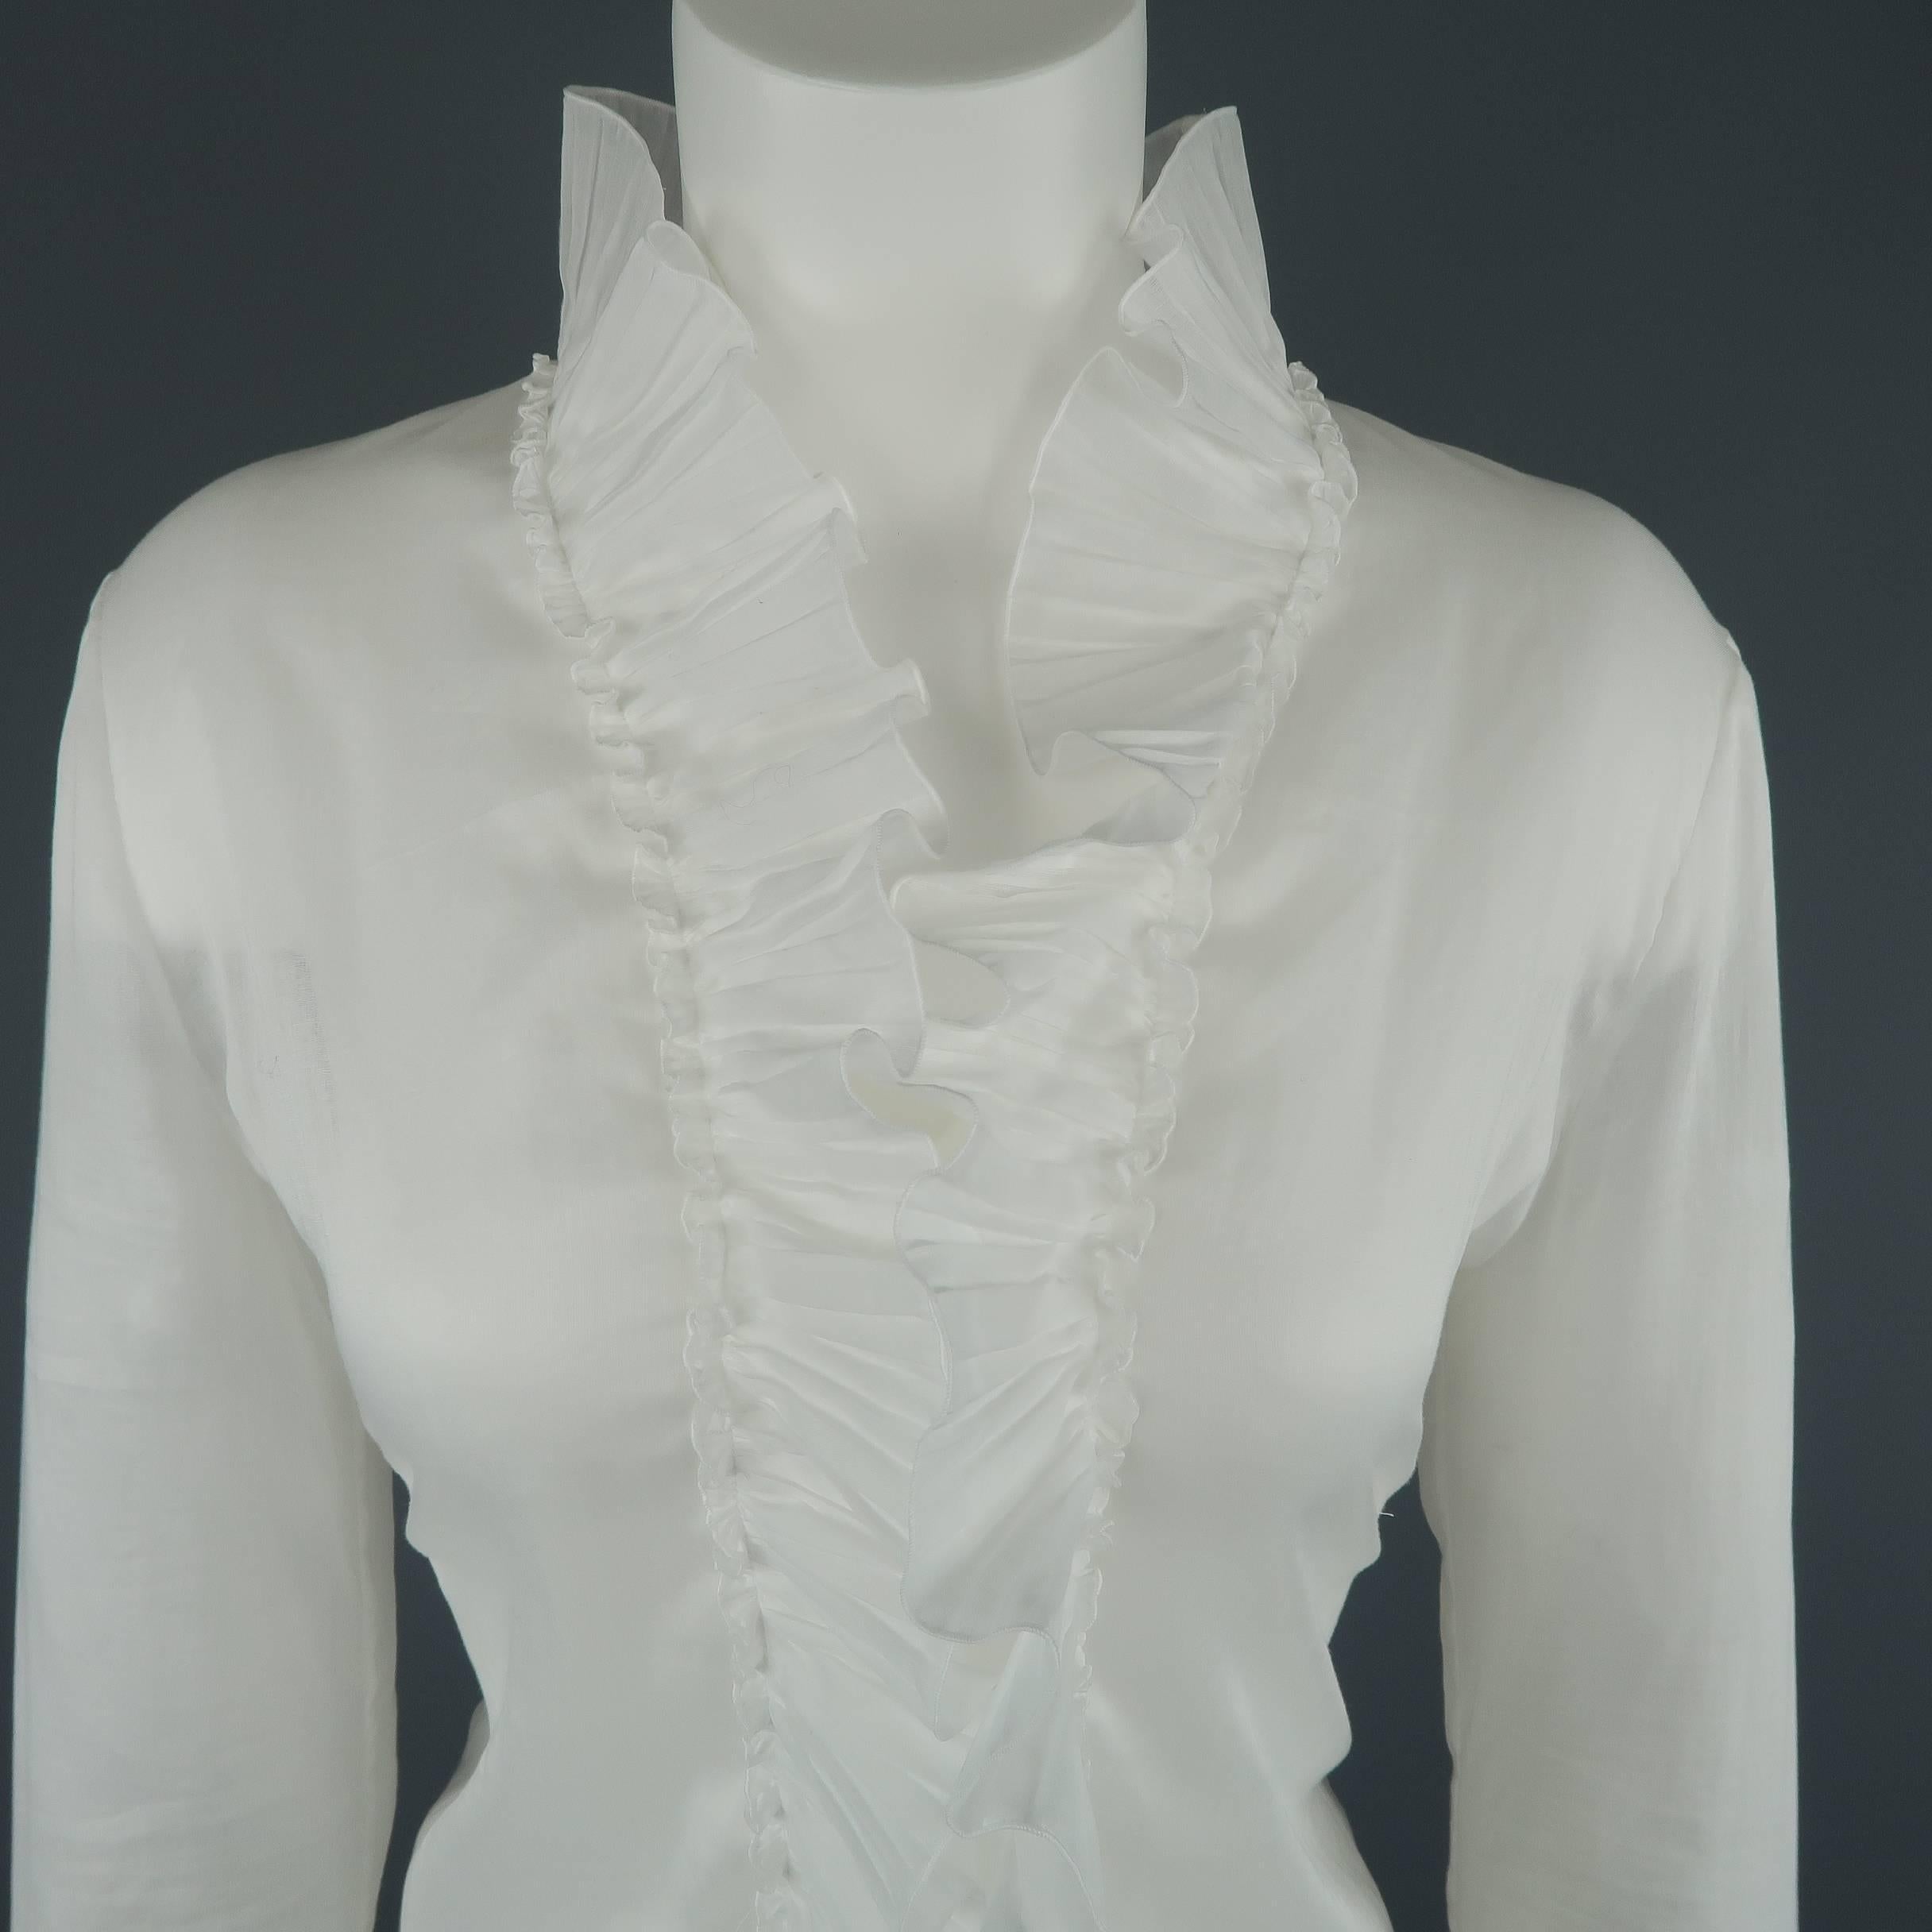 ALEXANDER MCQUEEN blouse comes in a light weight, sheer cotton gauze and features a V neck line, four button front, curved hem, and pleated ruffle trim and cuffs. Label removed. Made in Italy.
 
Excellent Pre-Owned Condition.
Marked: (no size)
